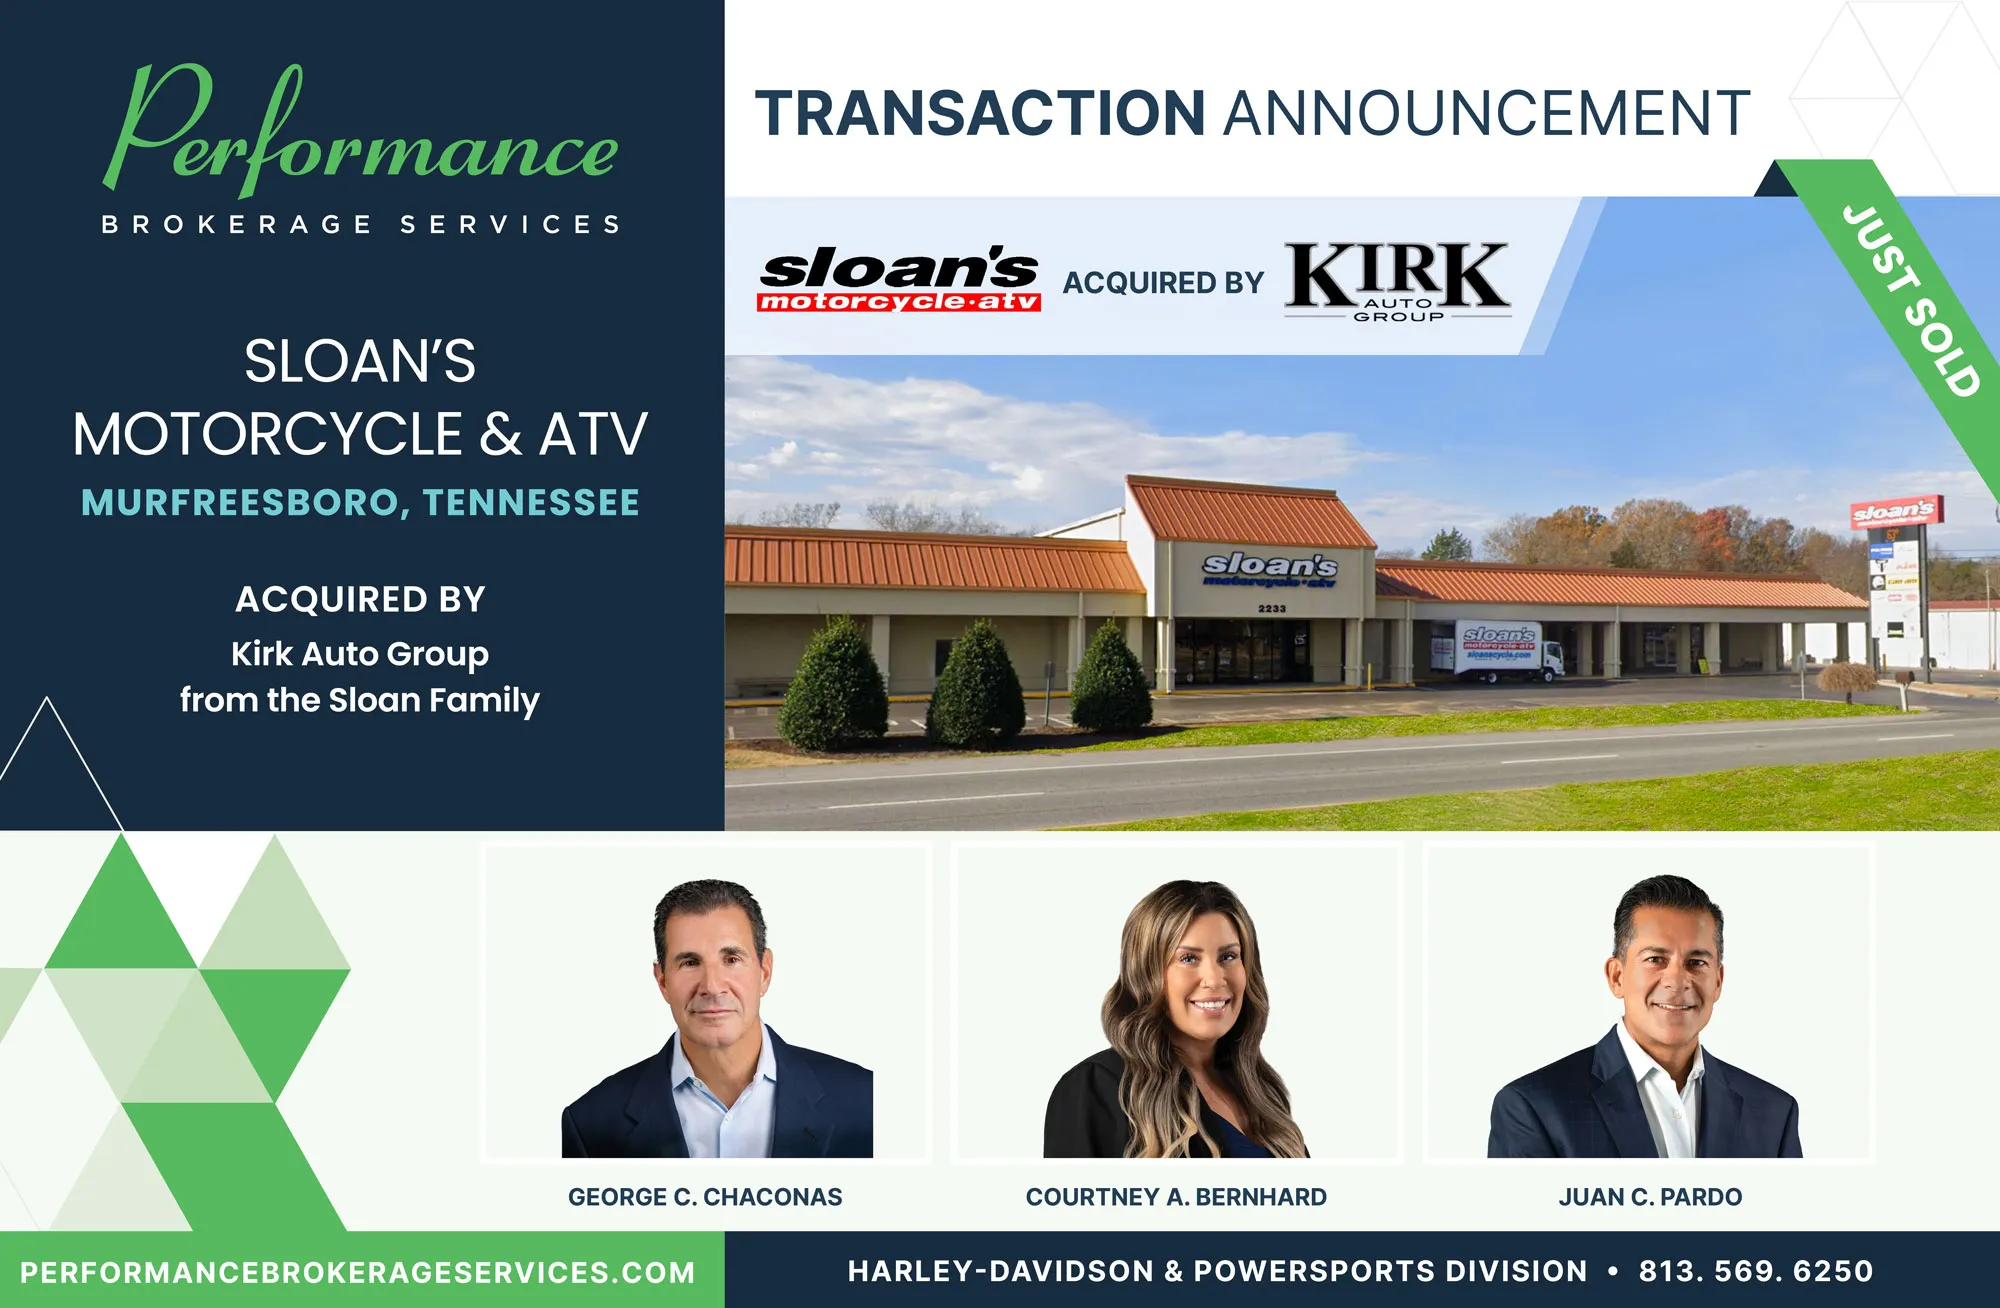 Sloan's Motorcycle & ATV sells to Kirk Auto Company with Performance Brokerage